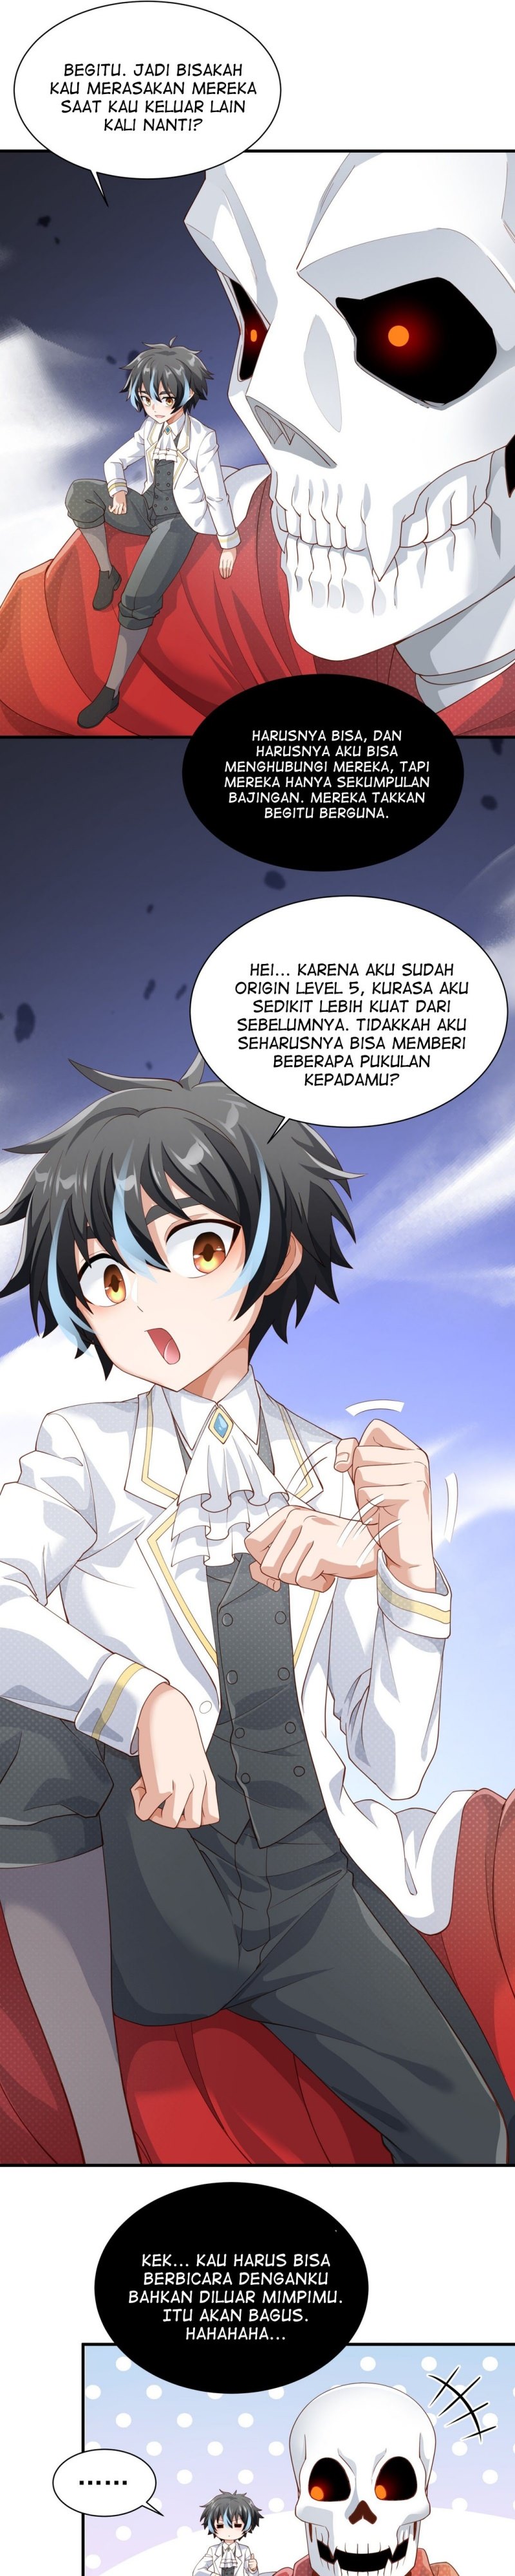 Dilarang COPAS - situs resmi www.mangacanblog.com - Komik little tyrant doesnt want to meet with a bad end 026 - chapter 26 27 Indonesia little tyrant doesnt want to meet with a bad end 026 - chapter 26 Terbaru 21|Baca Manga Komik Indonesia|Mangacan